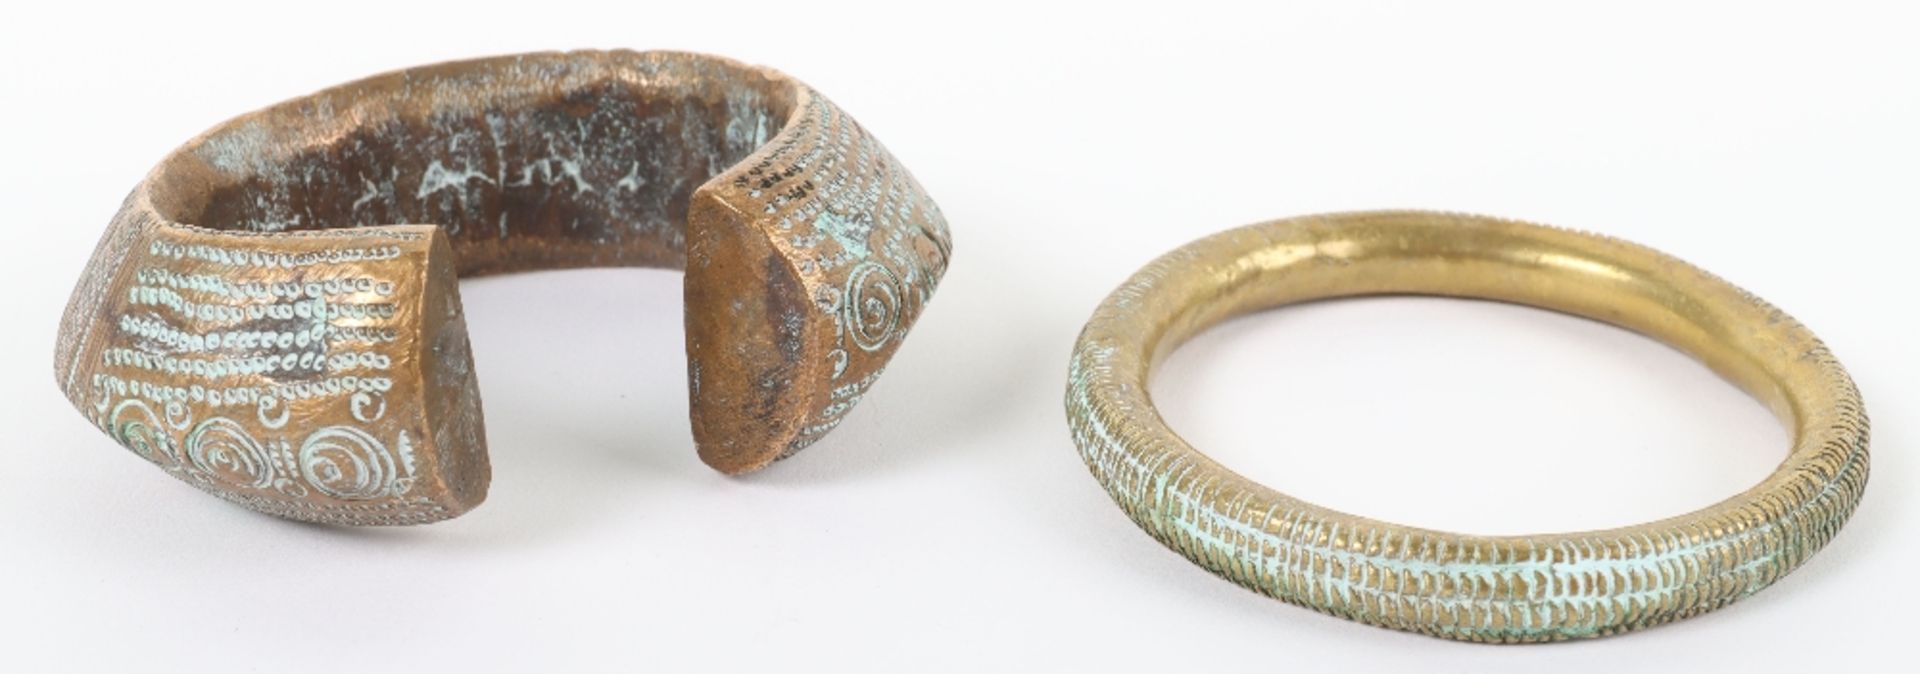 Four 18th century brass and bronze African bangles - Image 3 of 4